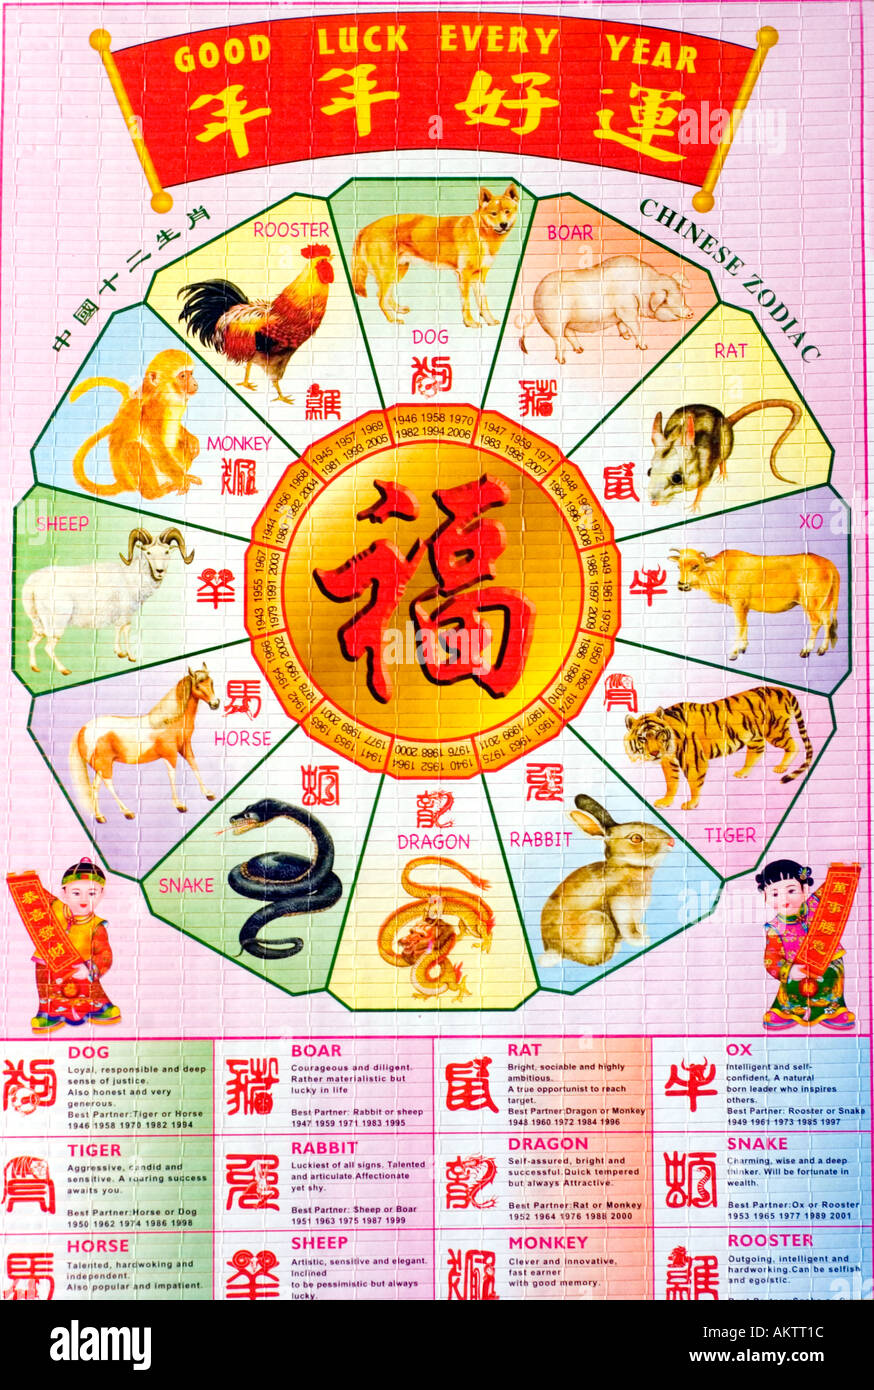 Chinese Astrological Calendar With Images of Different Animals that